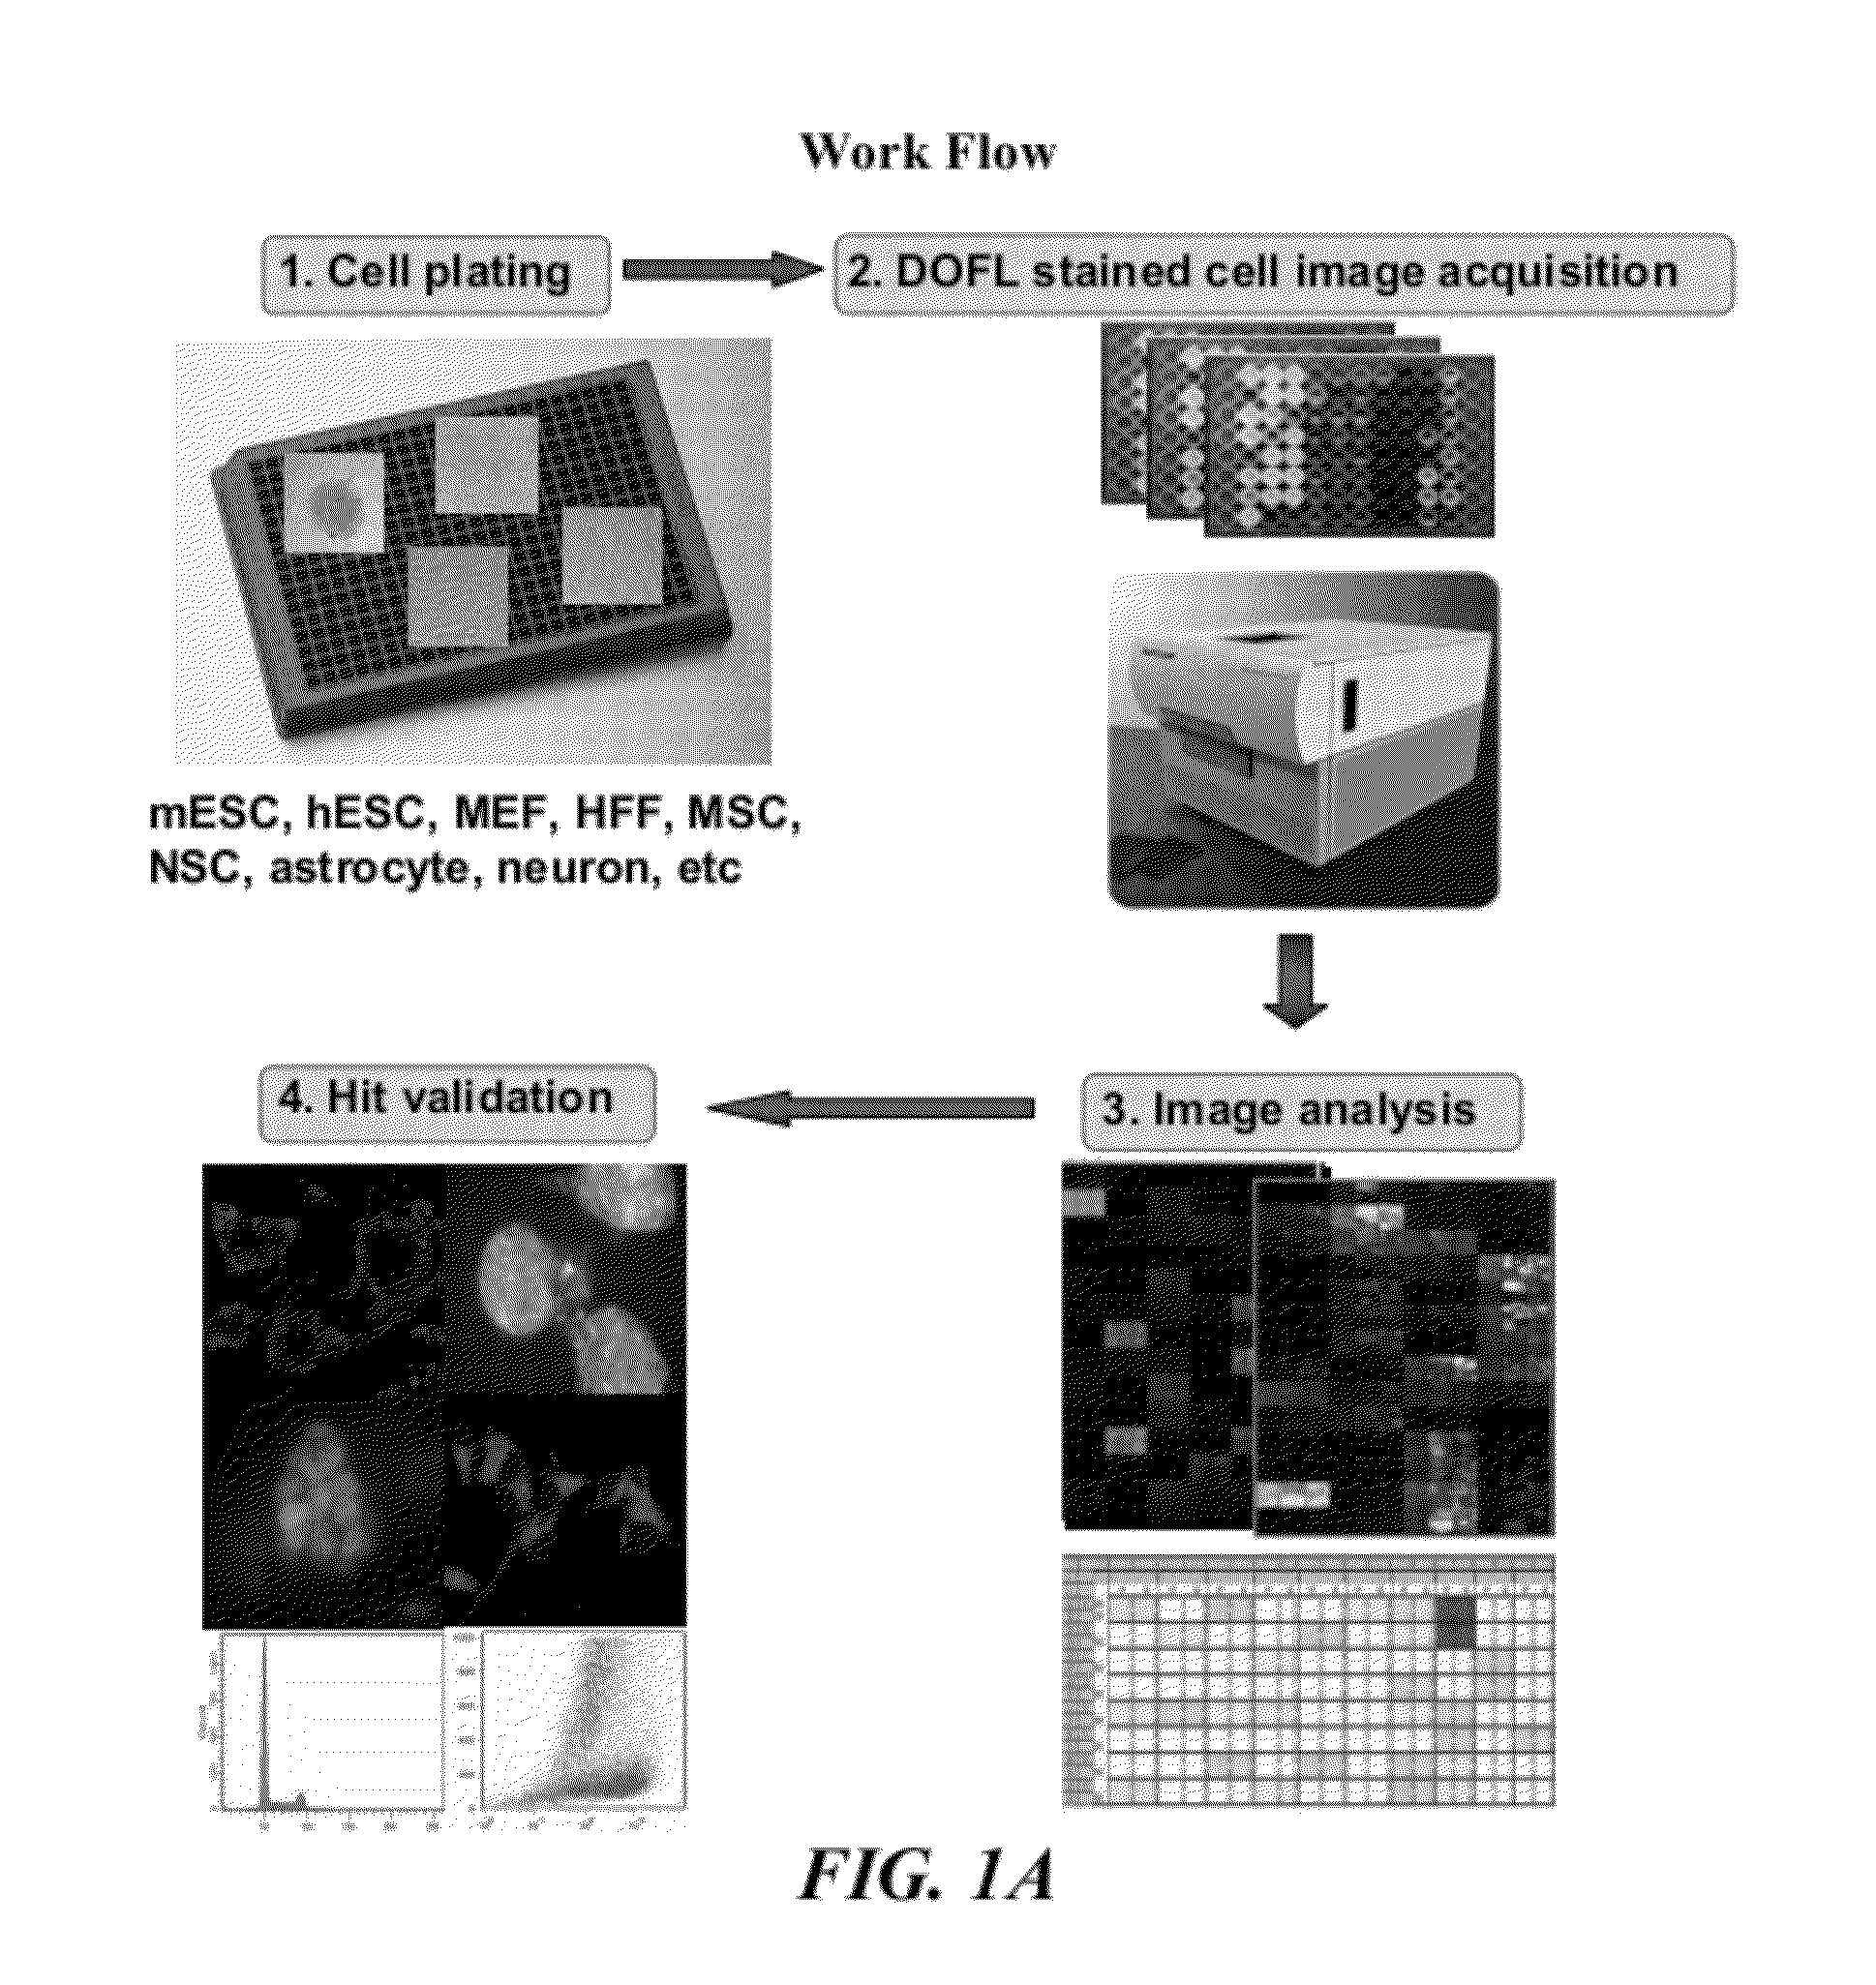 Methods for detecting embryonic stem cells, induced pluripotent stem cells, or cells undergoing reprogramming to produce induced pluripotent stem cells